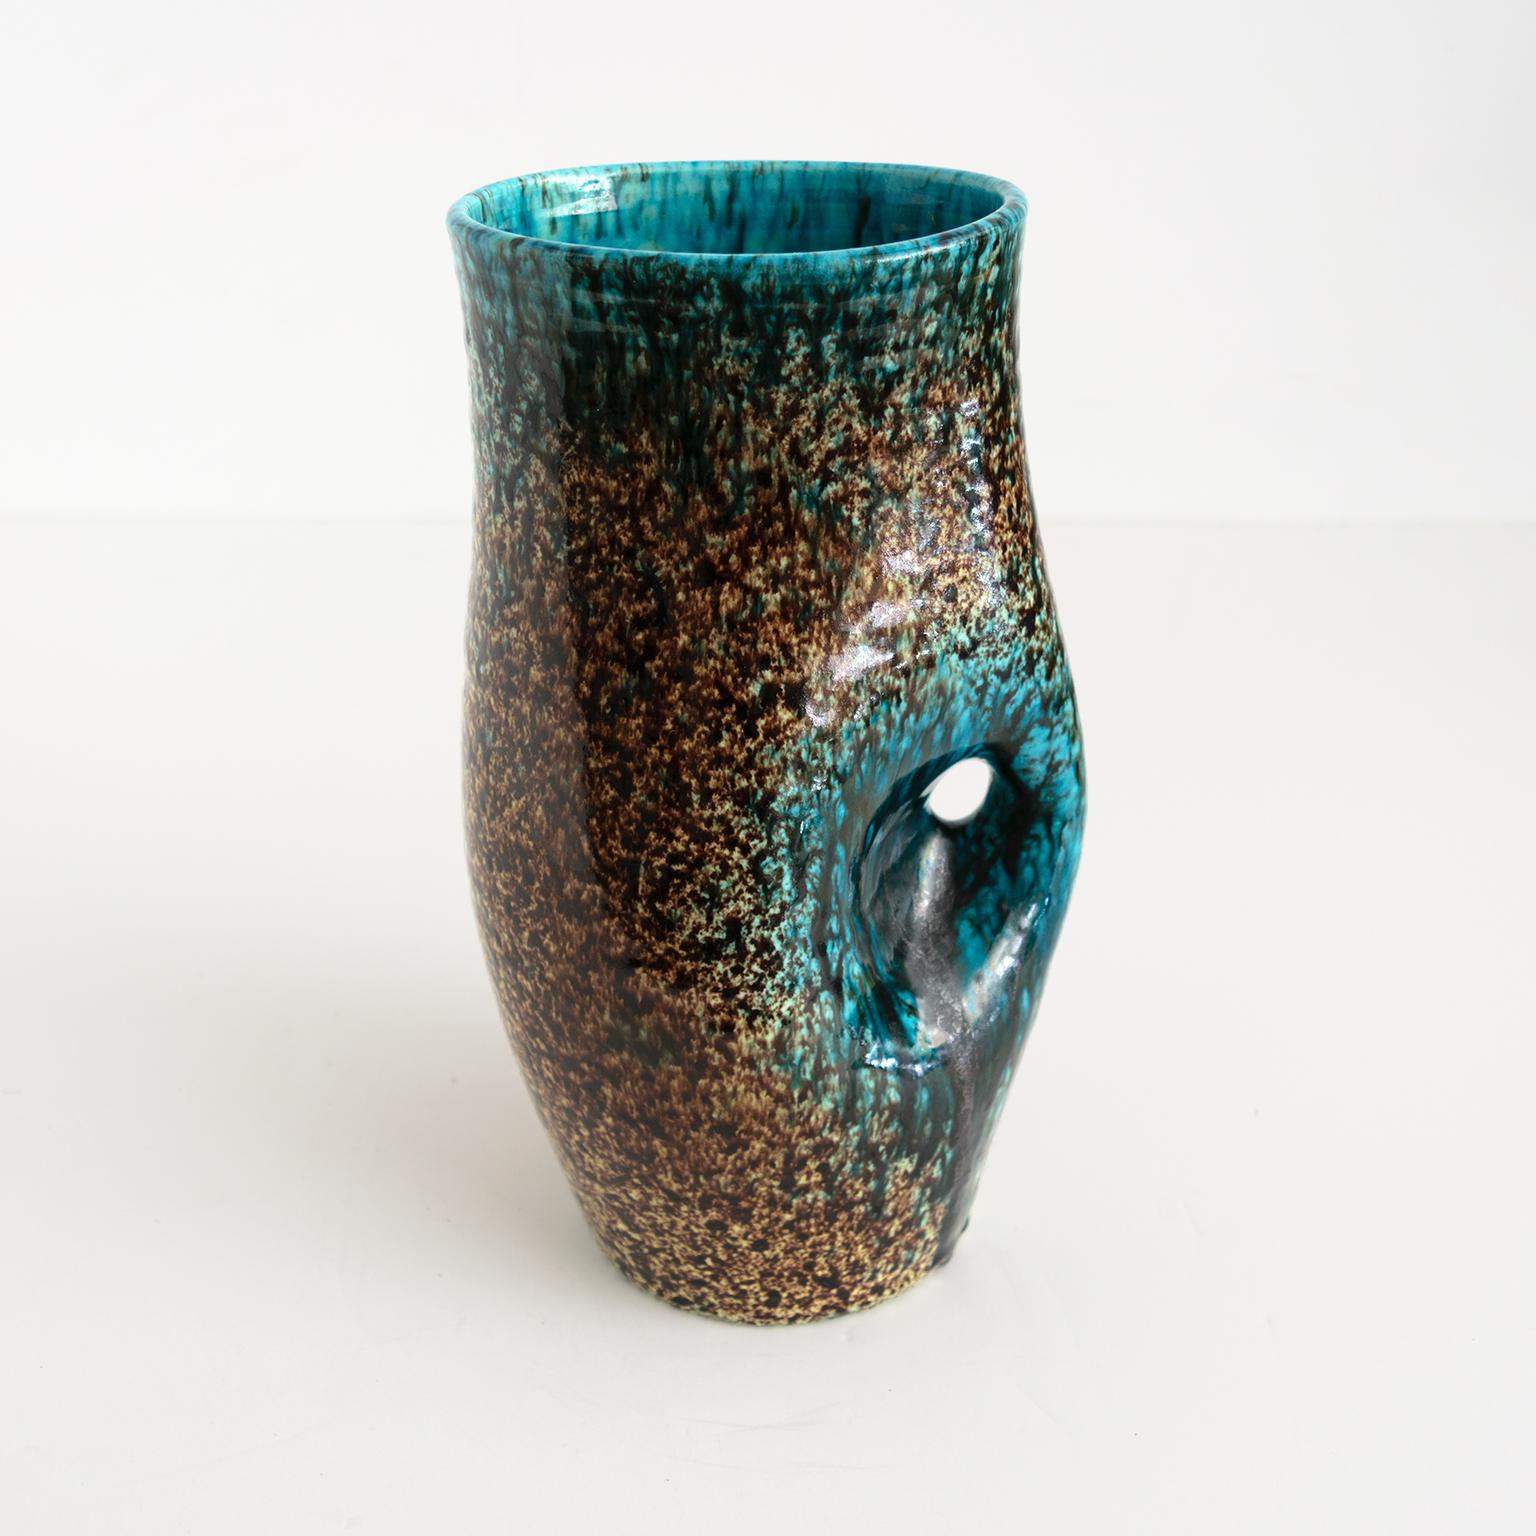 Hand thrown ceramic French midcentury vase from Les Potiers d’Accolay with an almost organic form. Beautiful glazed with richly colored speckled glaze.

Measures: Height 10.75”, width 6”, depth 5.5”.